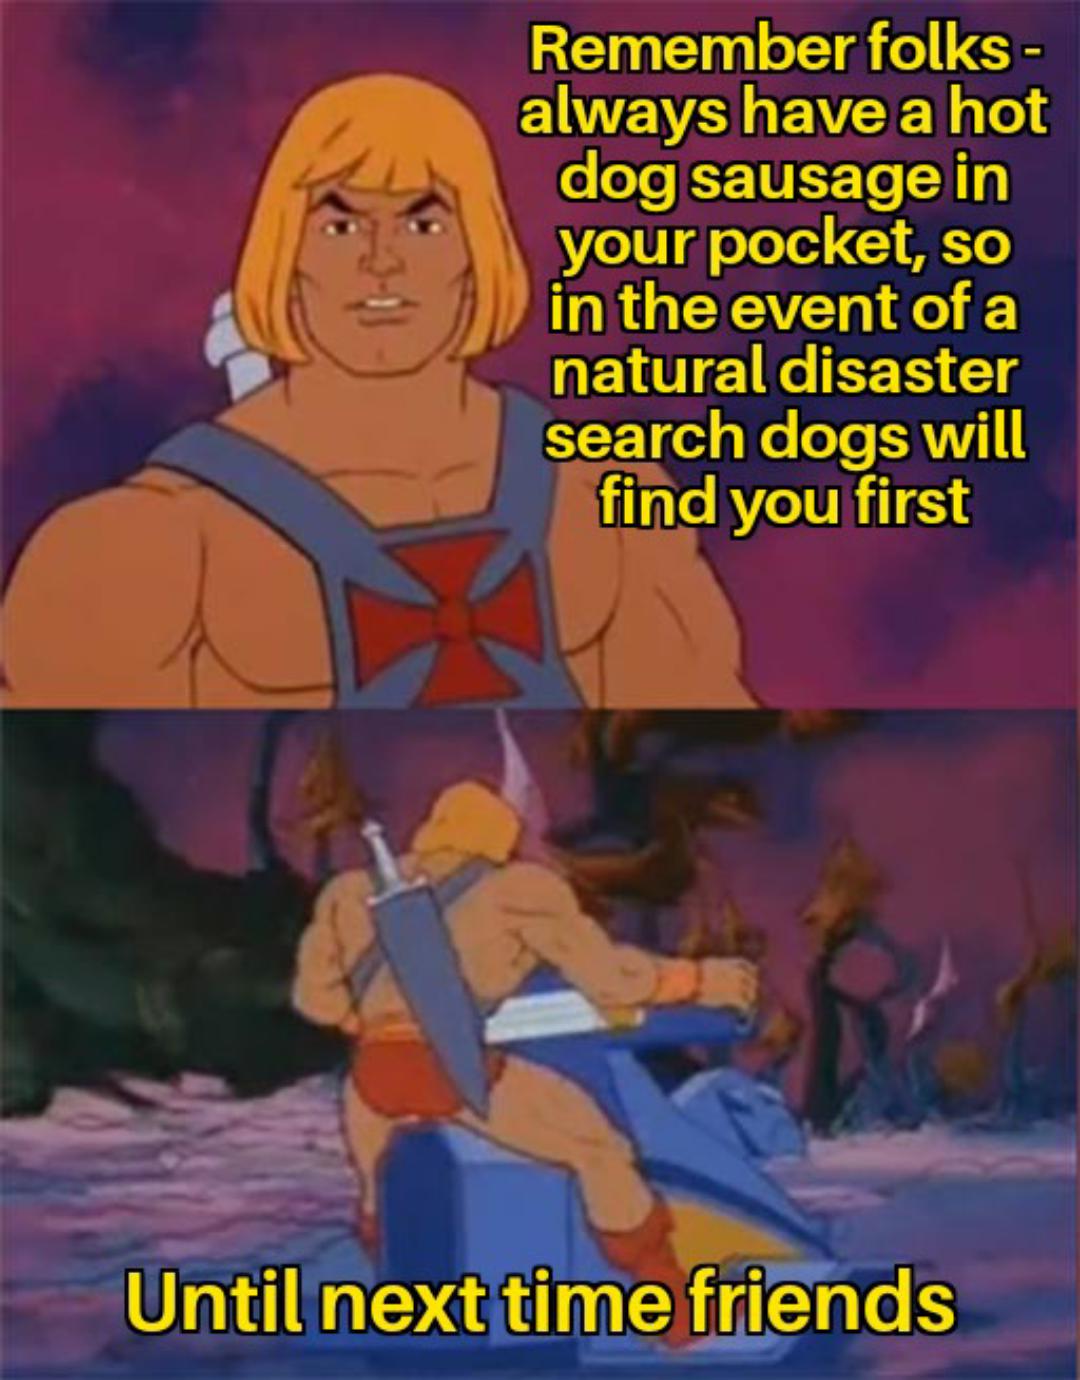 dank memes -- he man memes - Remember folks always have a hot dog sausage in your pocket, so in the event of a natural disaster search dogs will find you first Until next time friends